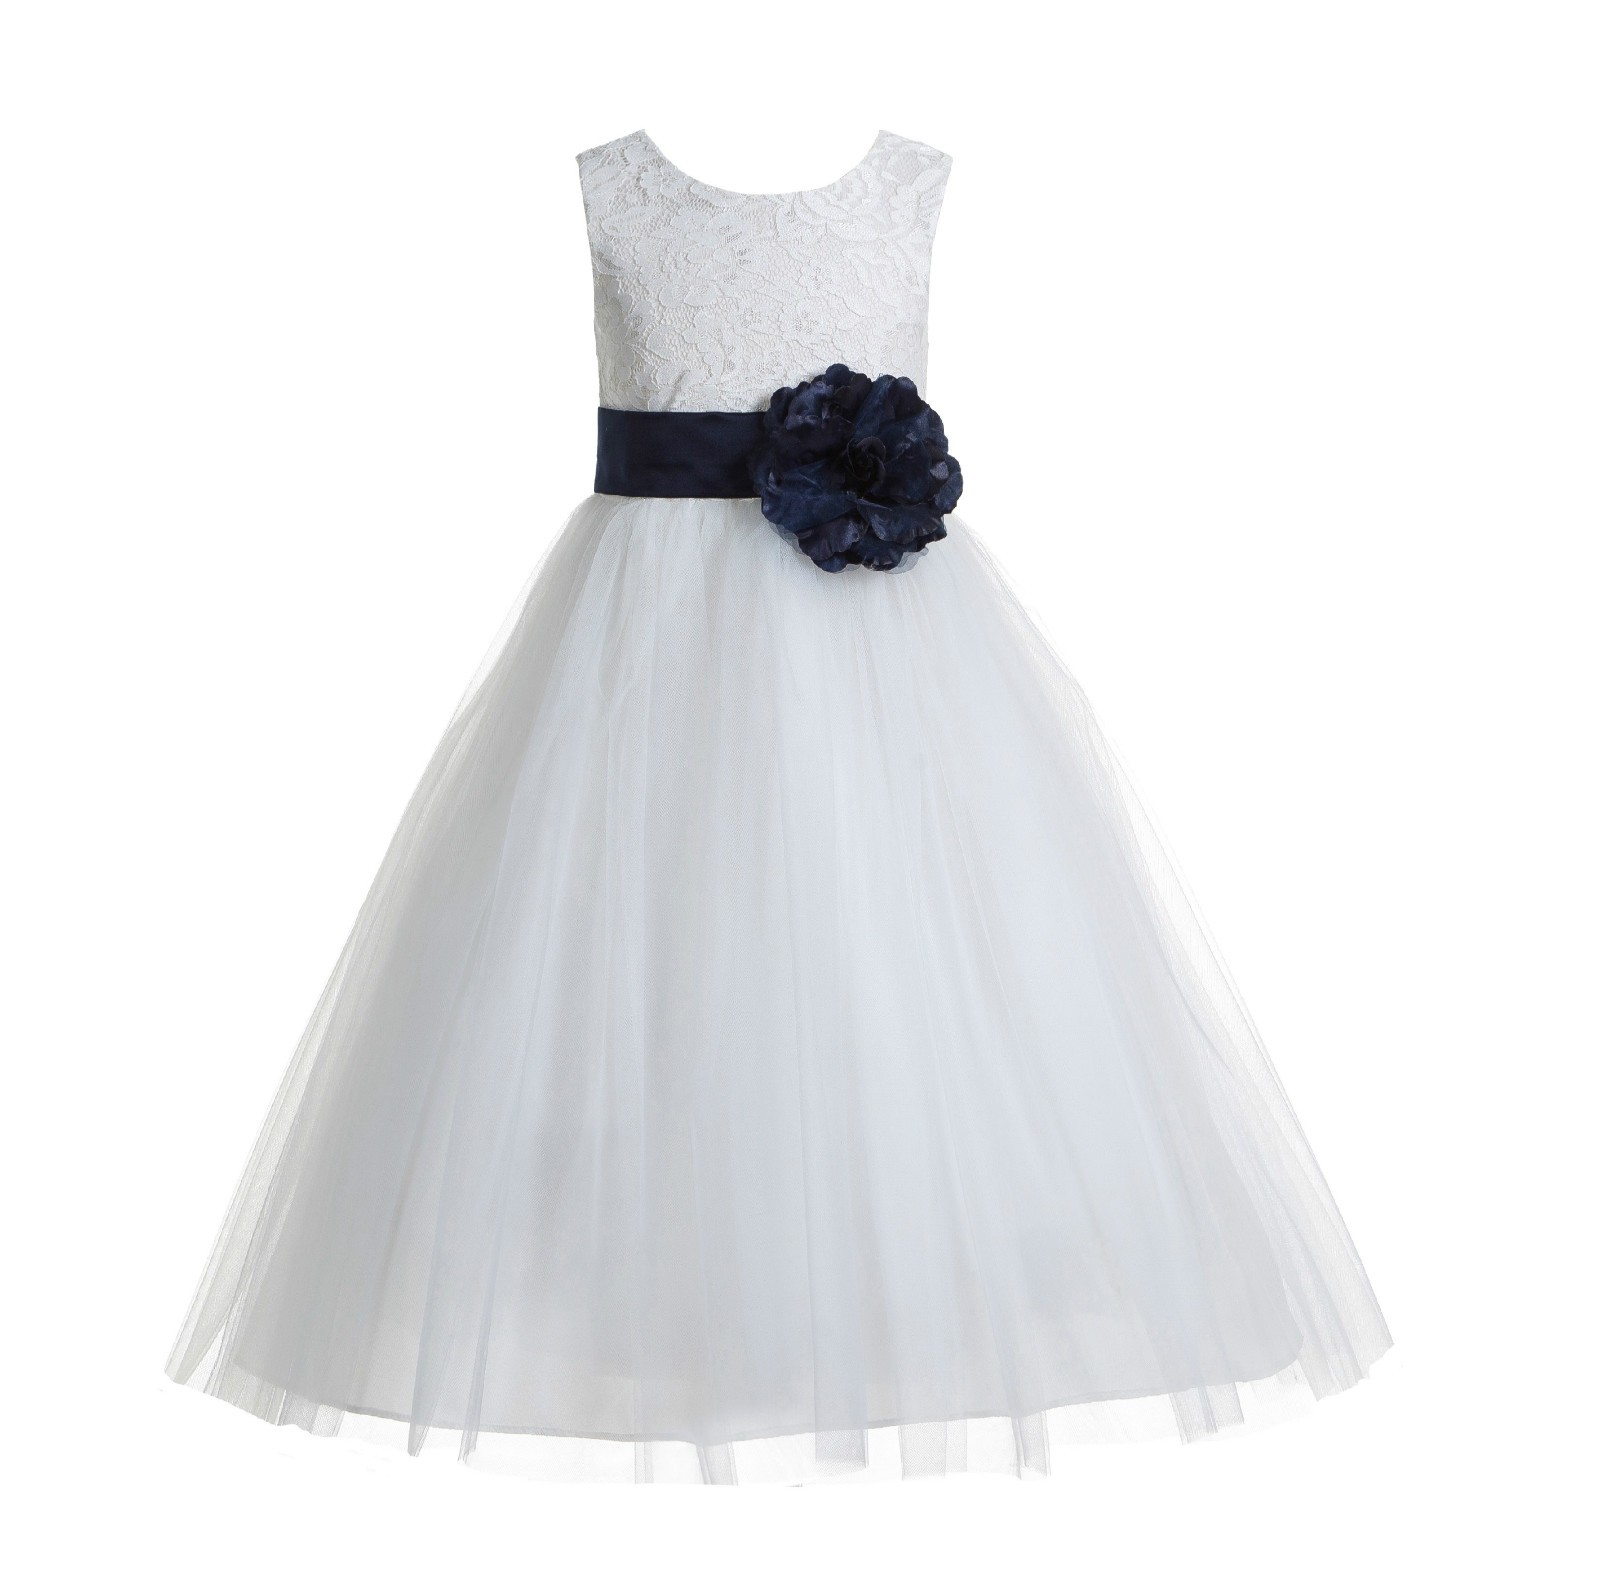 Ivory / Marine Floral Lace Heart Cutout Flower Girl Dress with Flower 172T